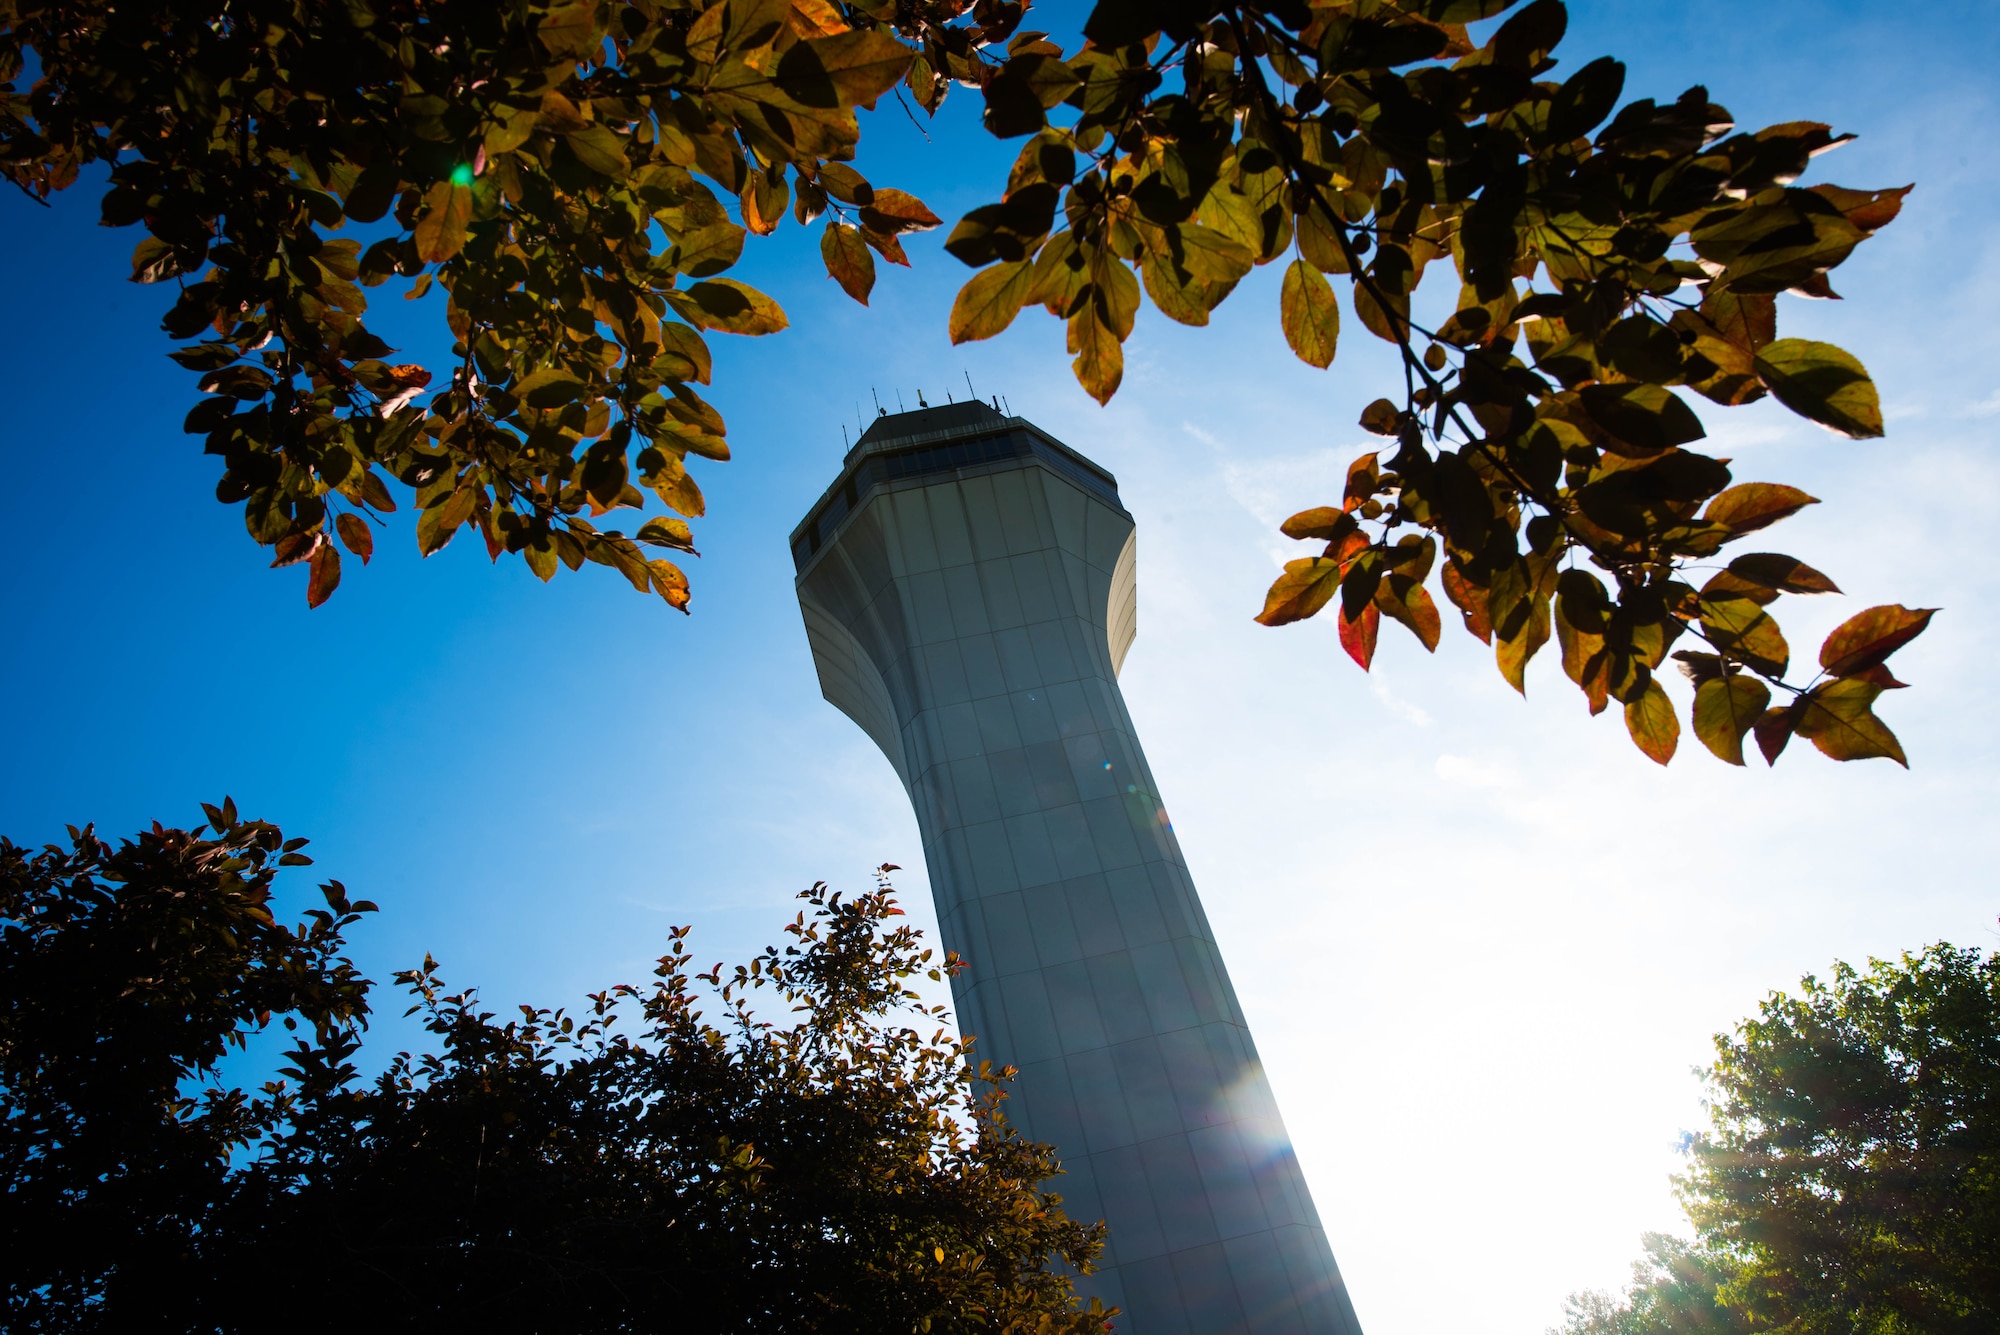 The air traffic control tower is seen through the trees